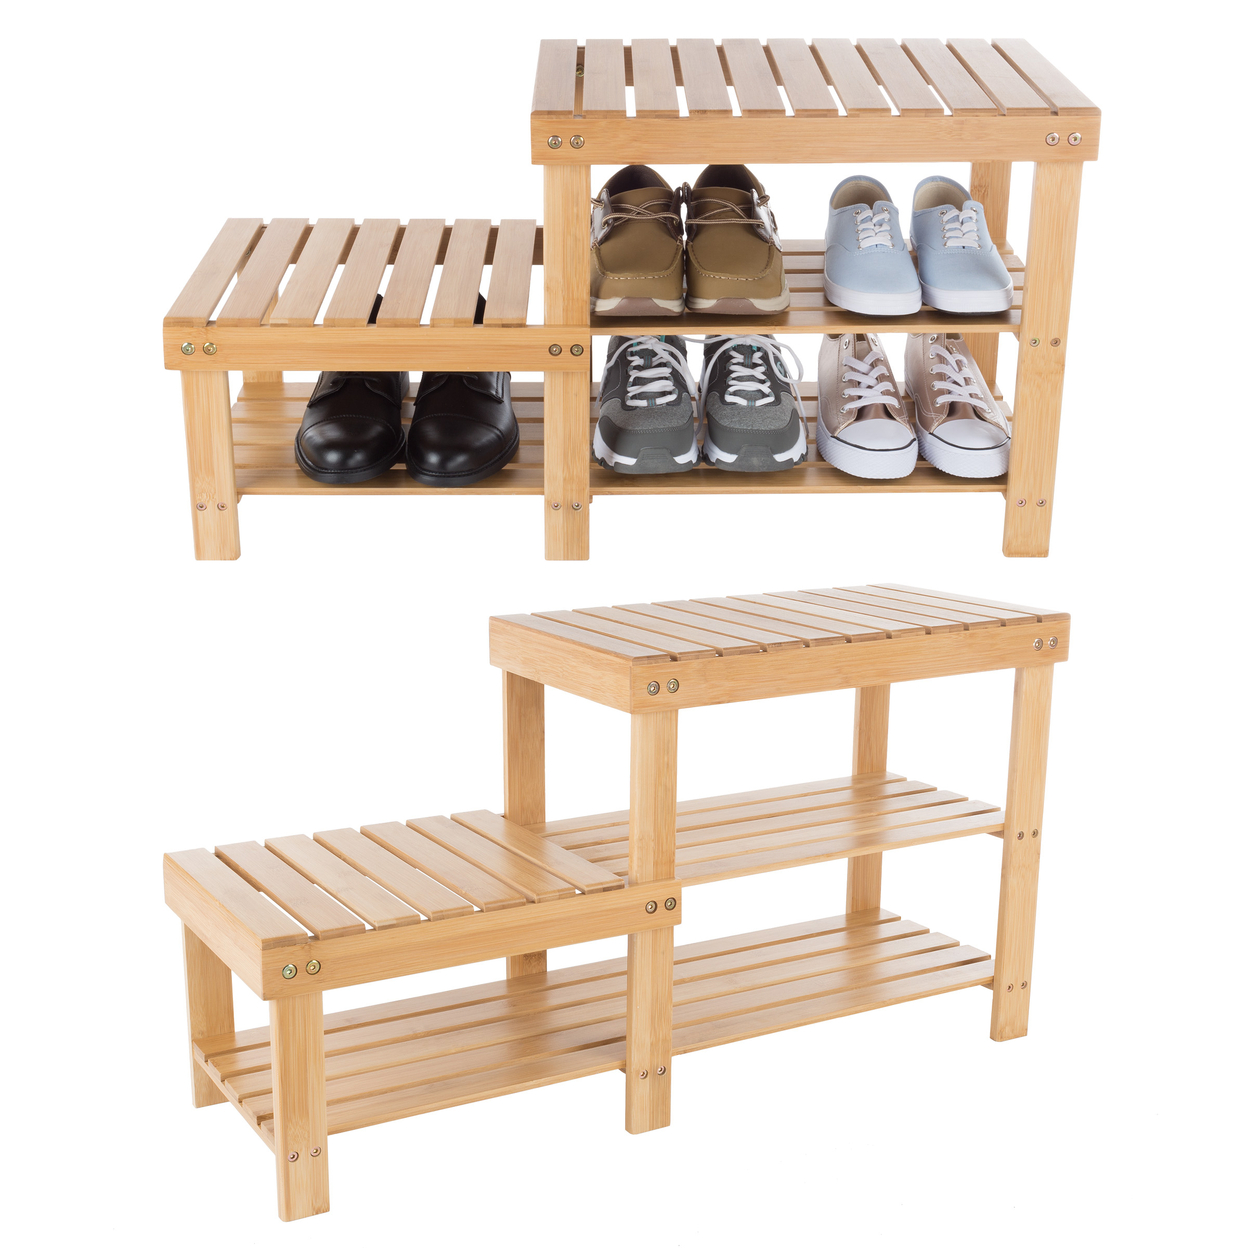 Wooden Bamboo Shoe Rack Seat 2 Tiers High Quality 33 X 18 Inch Natural Wood